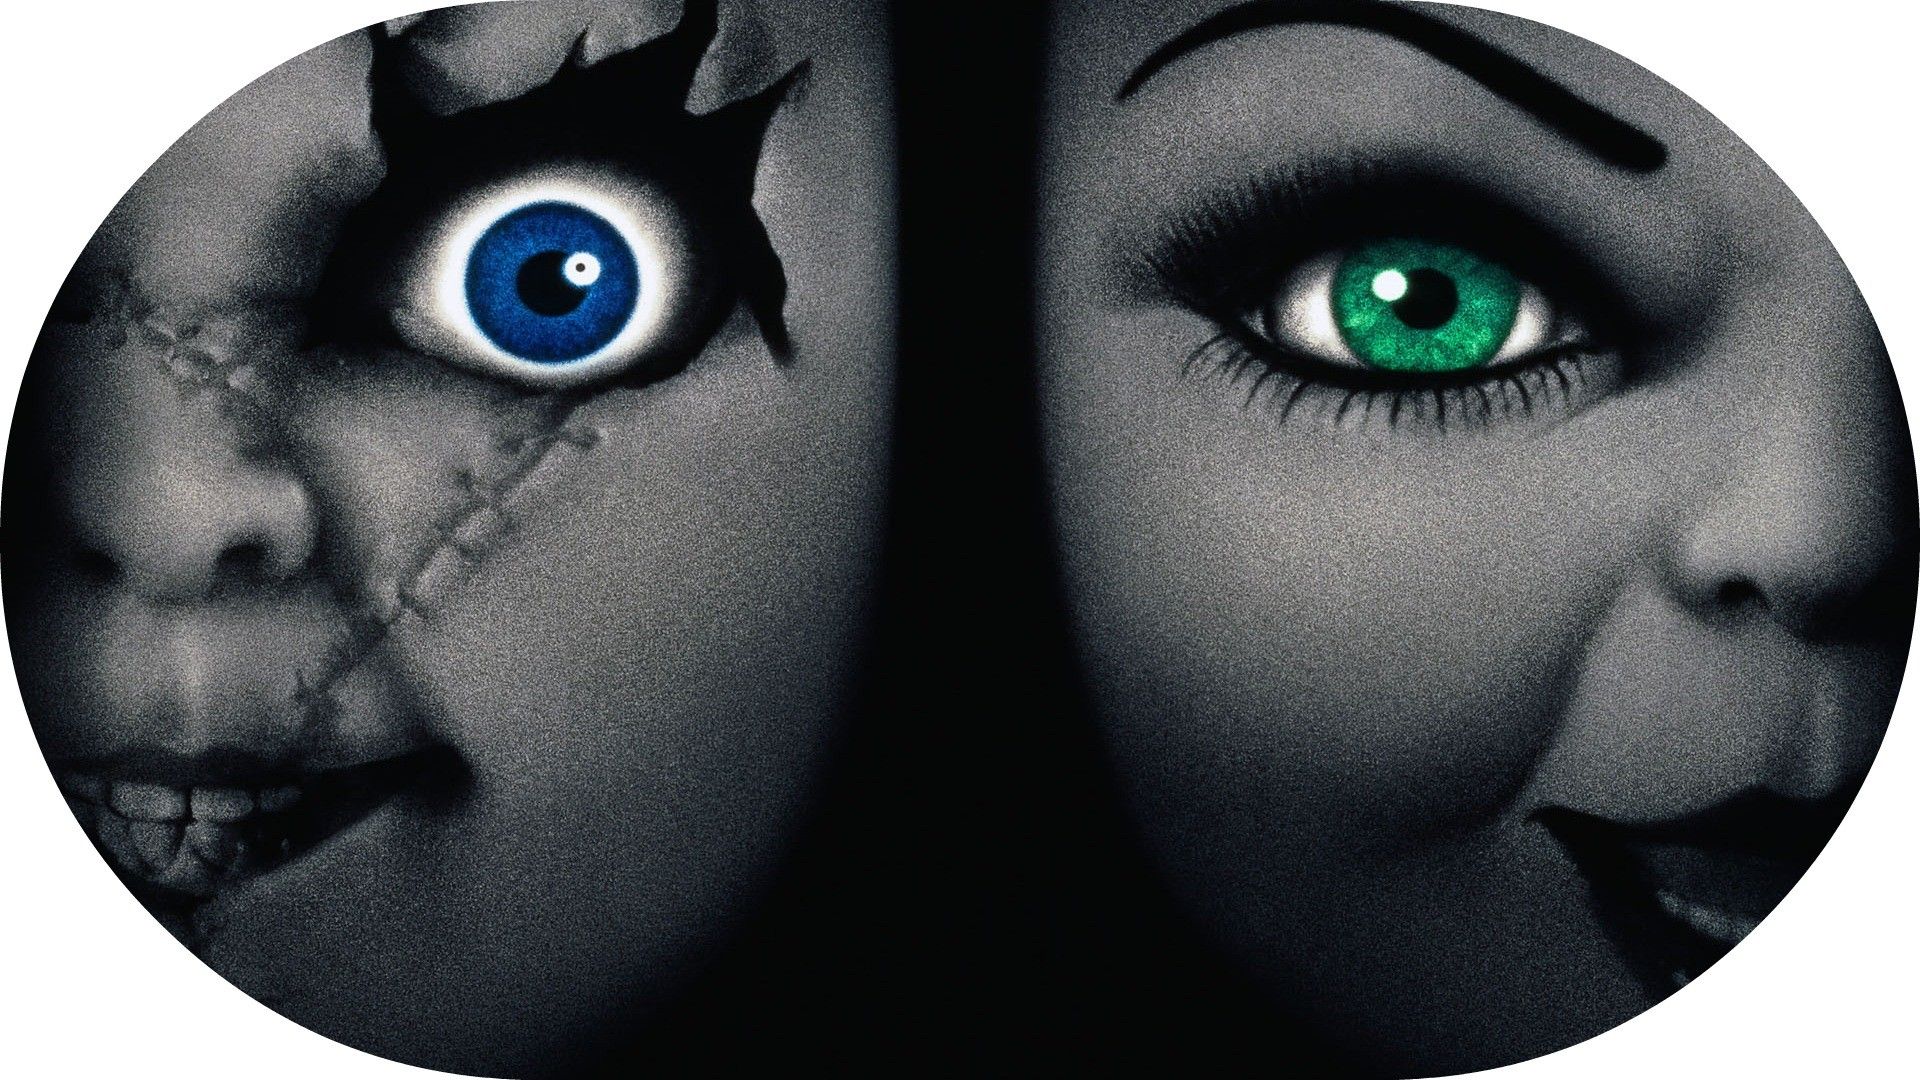 Tiffany From Bride Of Chucky Free 240x320 Wallpaper download  Download  Free Tiffany From Bride Of Chucky HD 240x320 Wallpapers to your mobile  phone or tablet